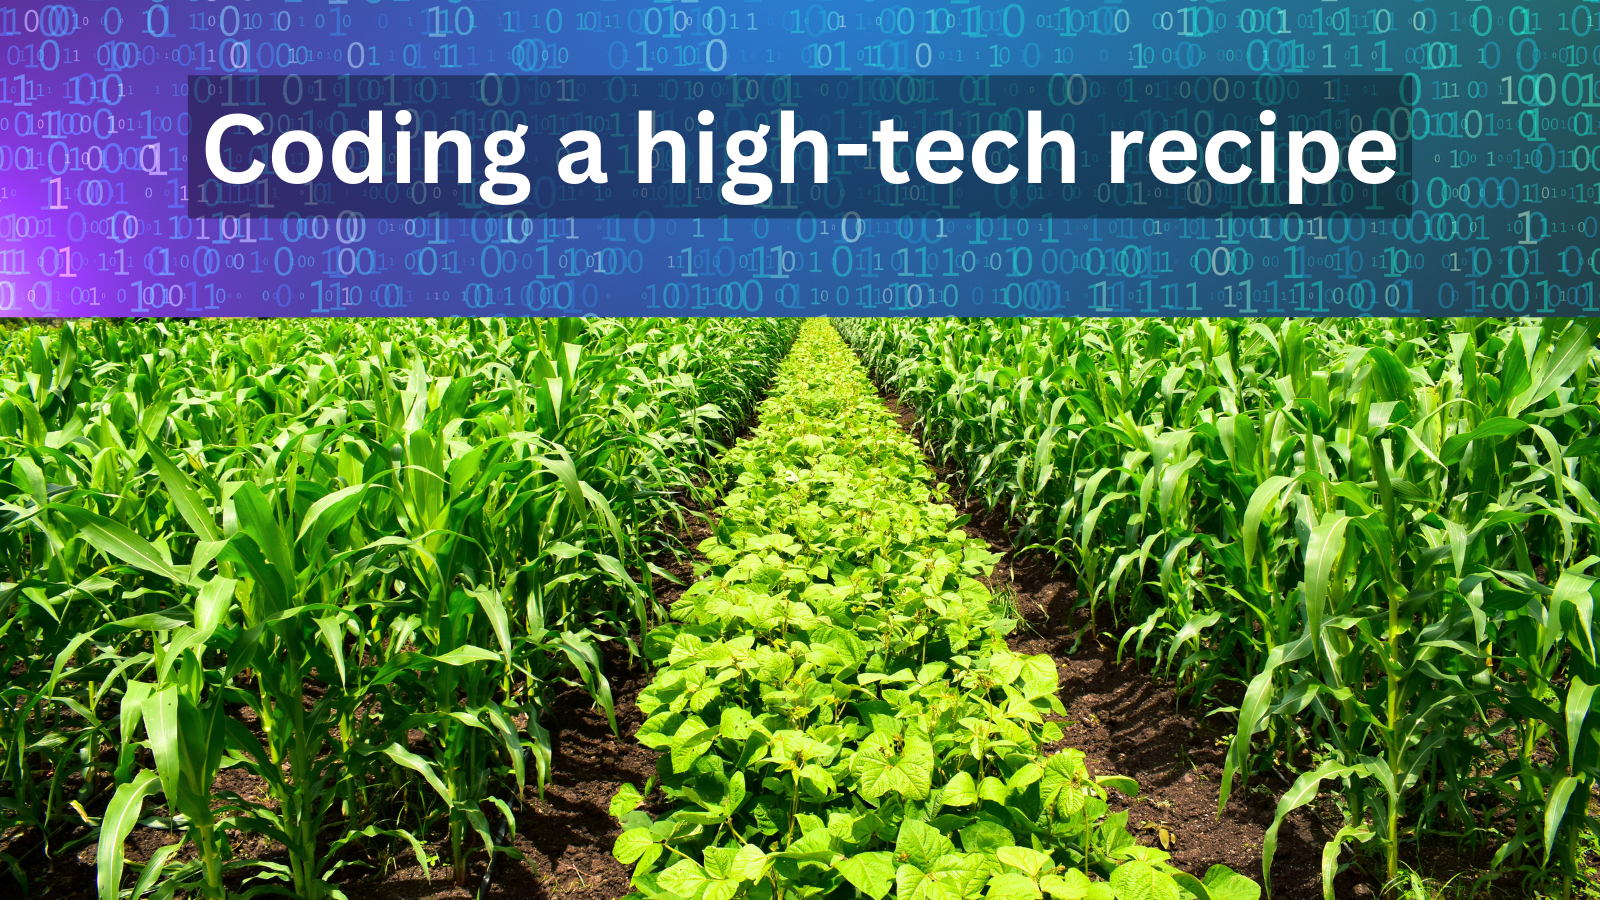 Field of salad greens and corn with onscreen text: Coding a high-tech recipe.